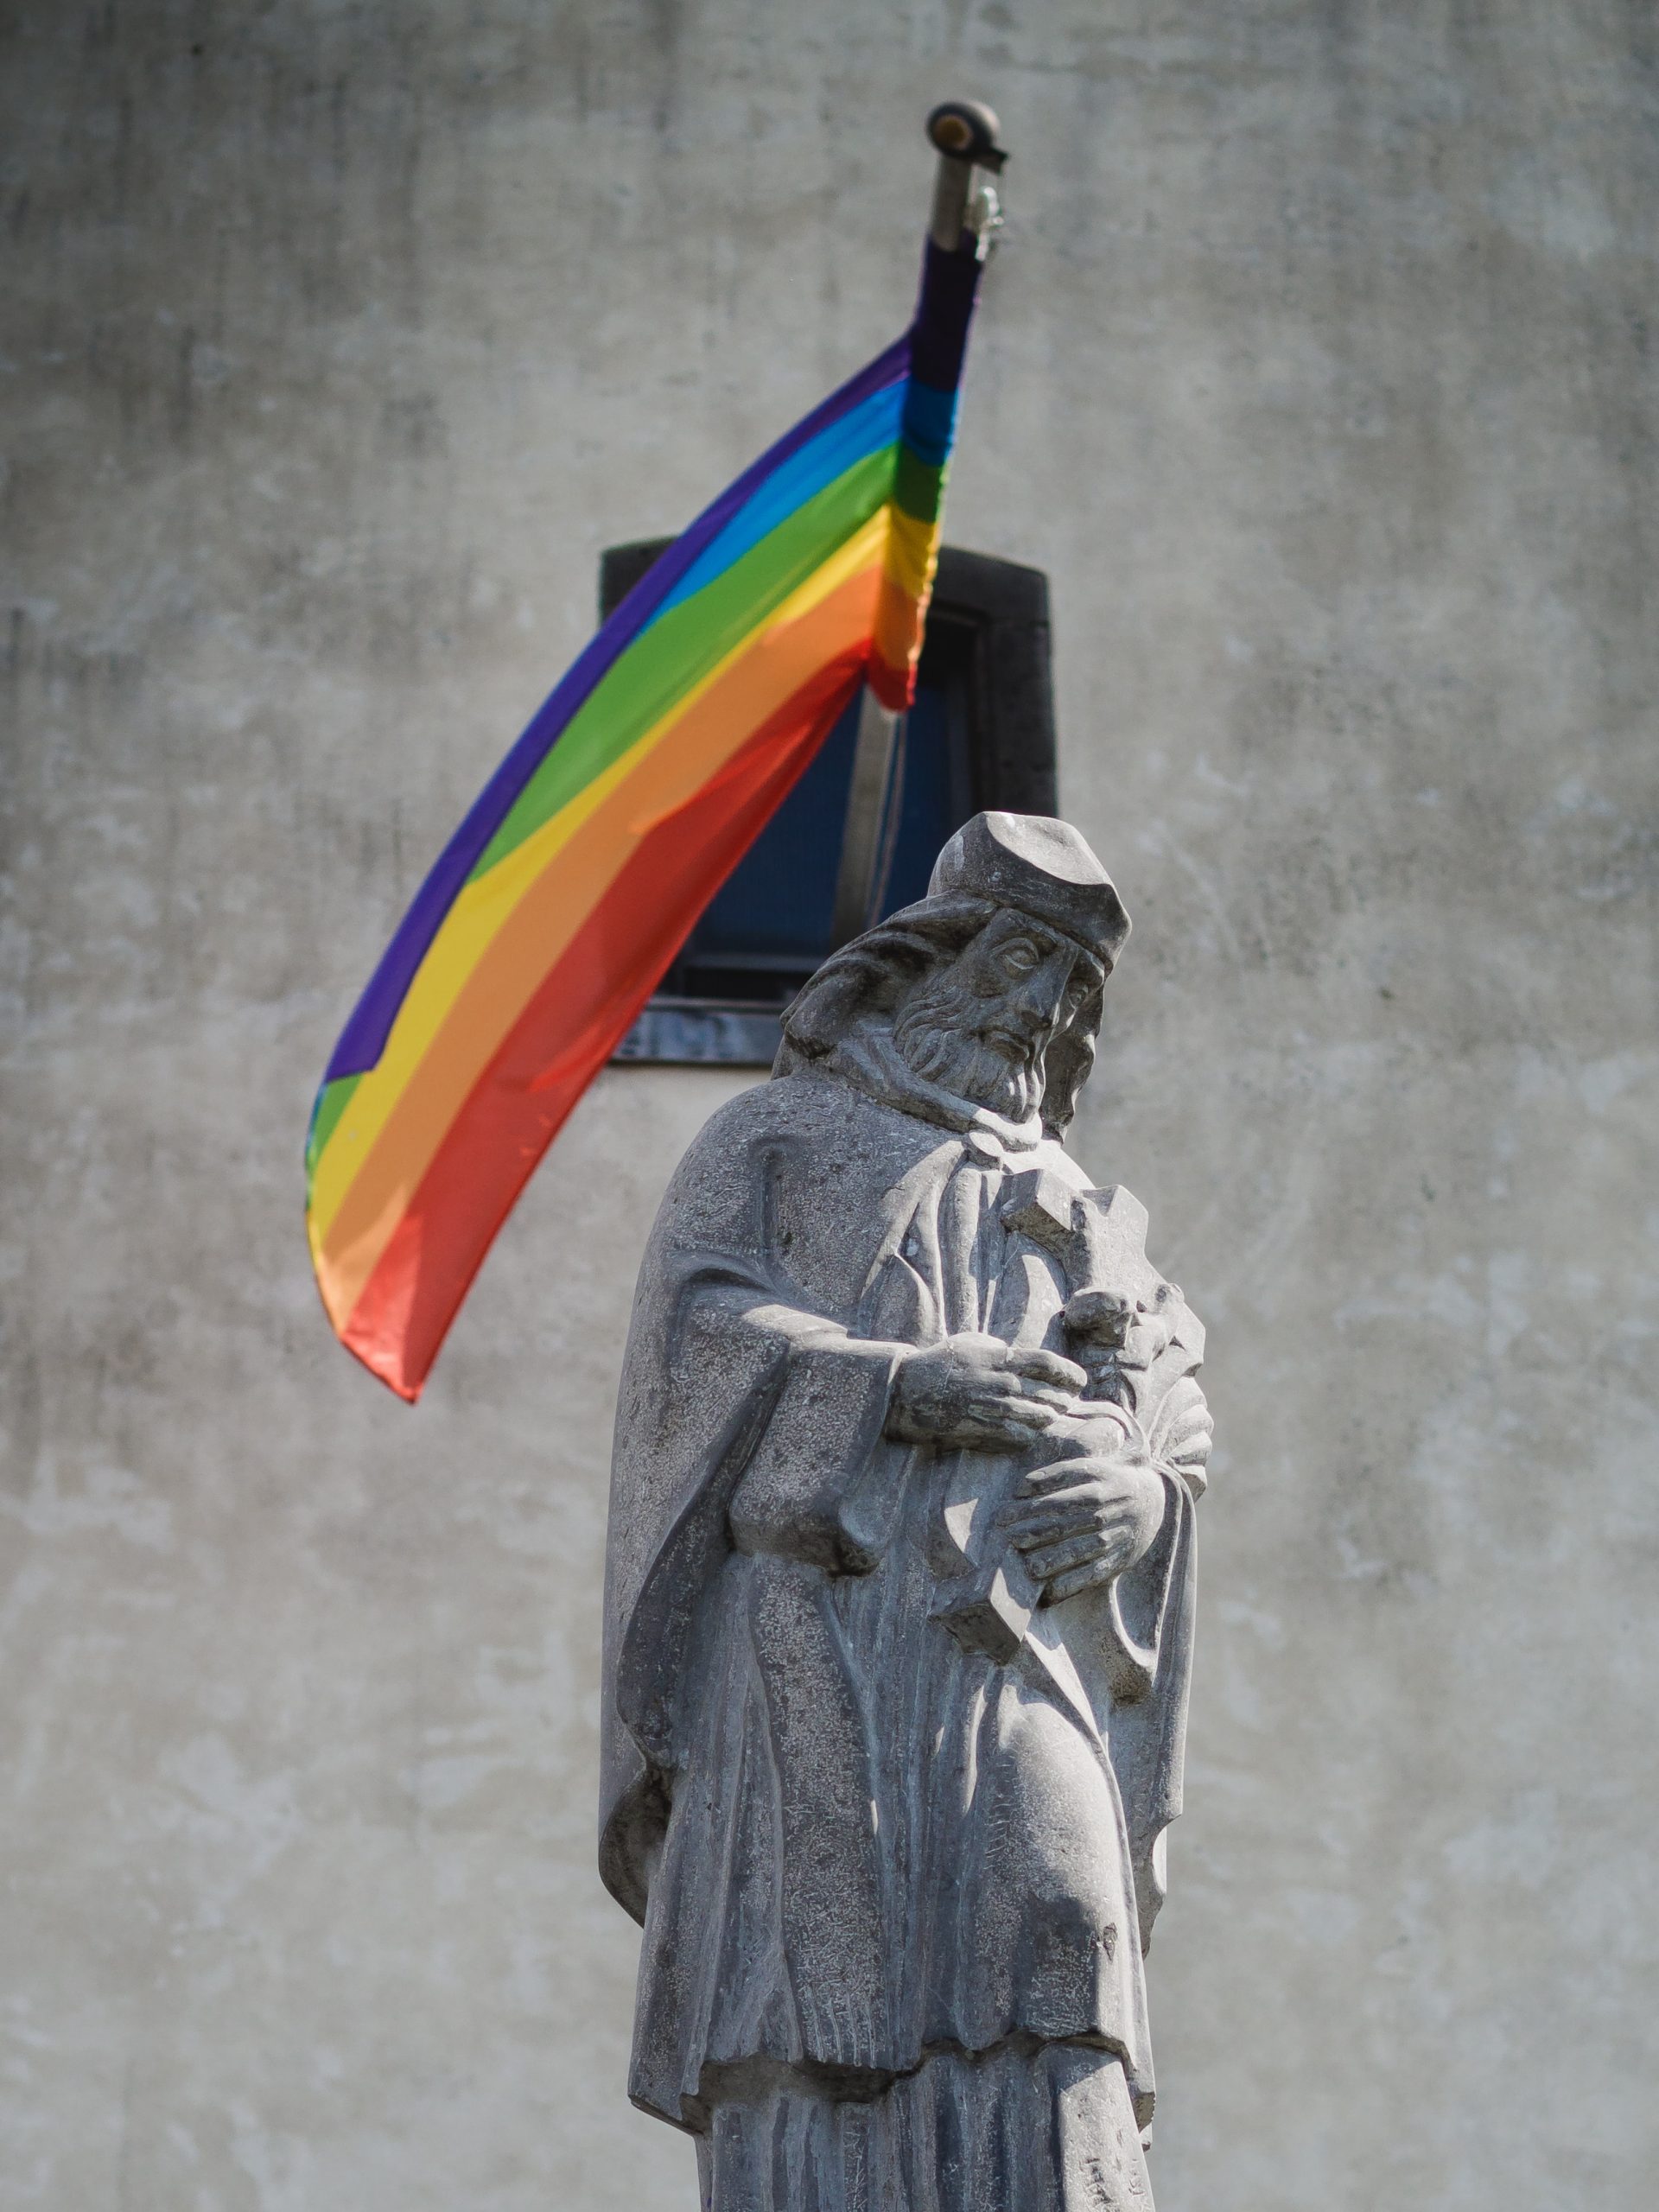 A photograph of a stone Catholic saint statue. The saint is a bearded man wearing a hat and robes and carrying a cross. Behind him, there is a stone wall with a window. A rainbow flag juts out of the window.